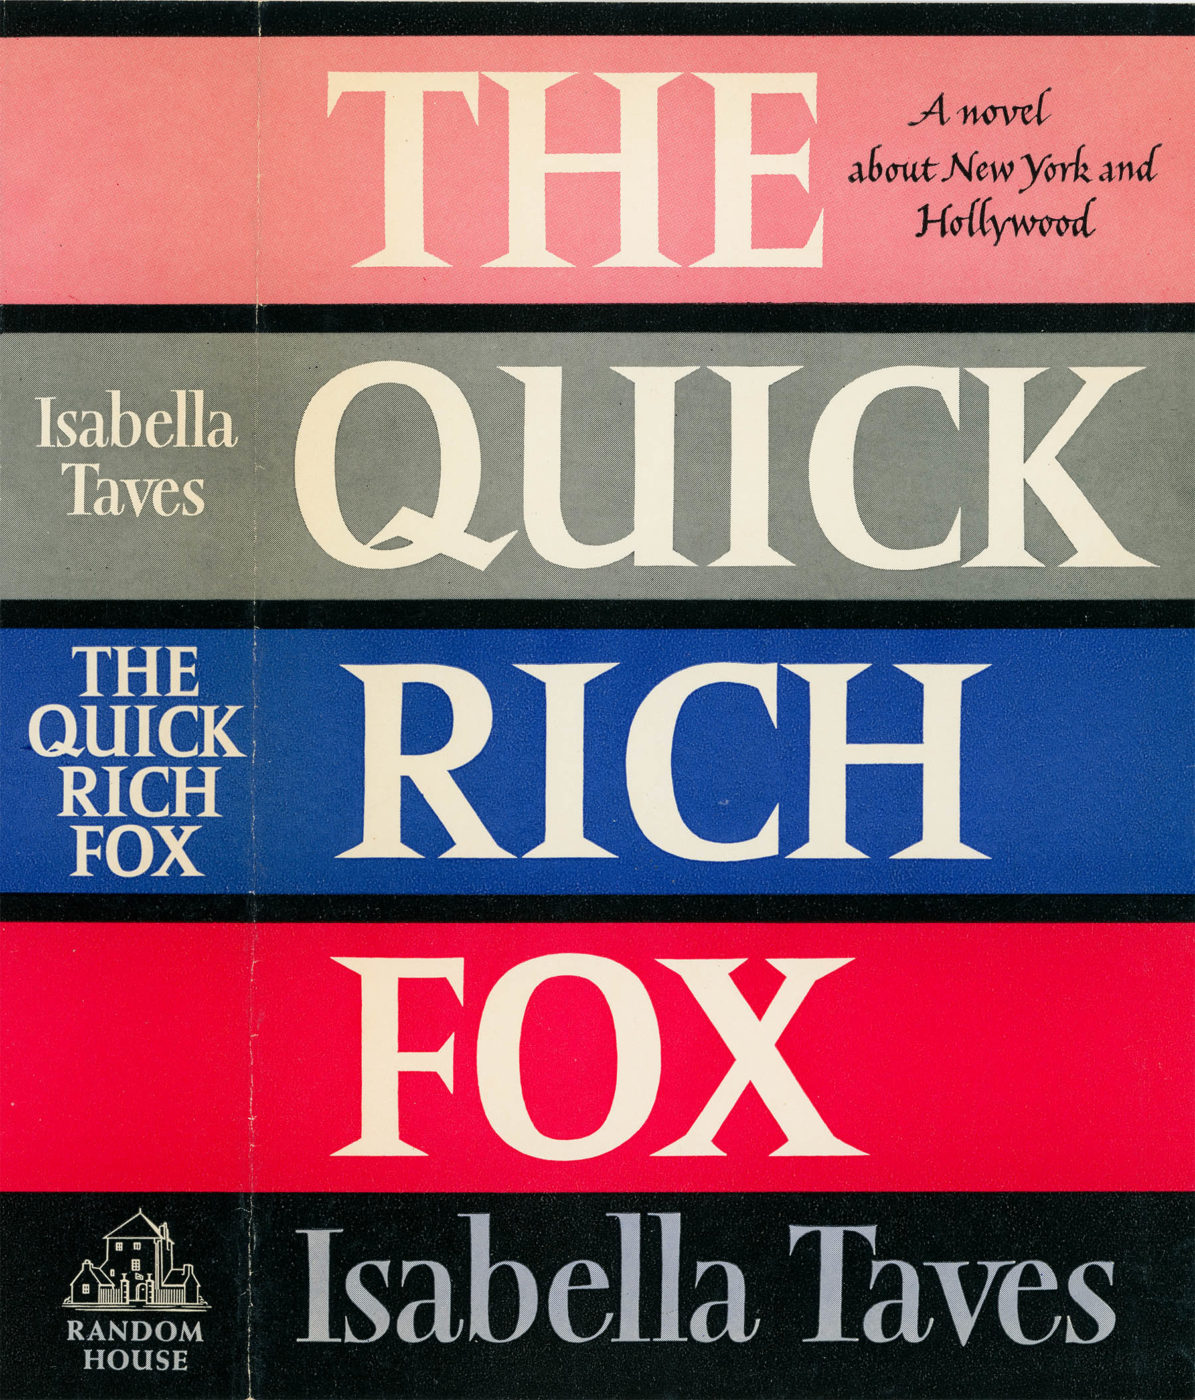 Book jacket of The Quick Rich Fox